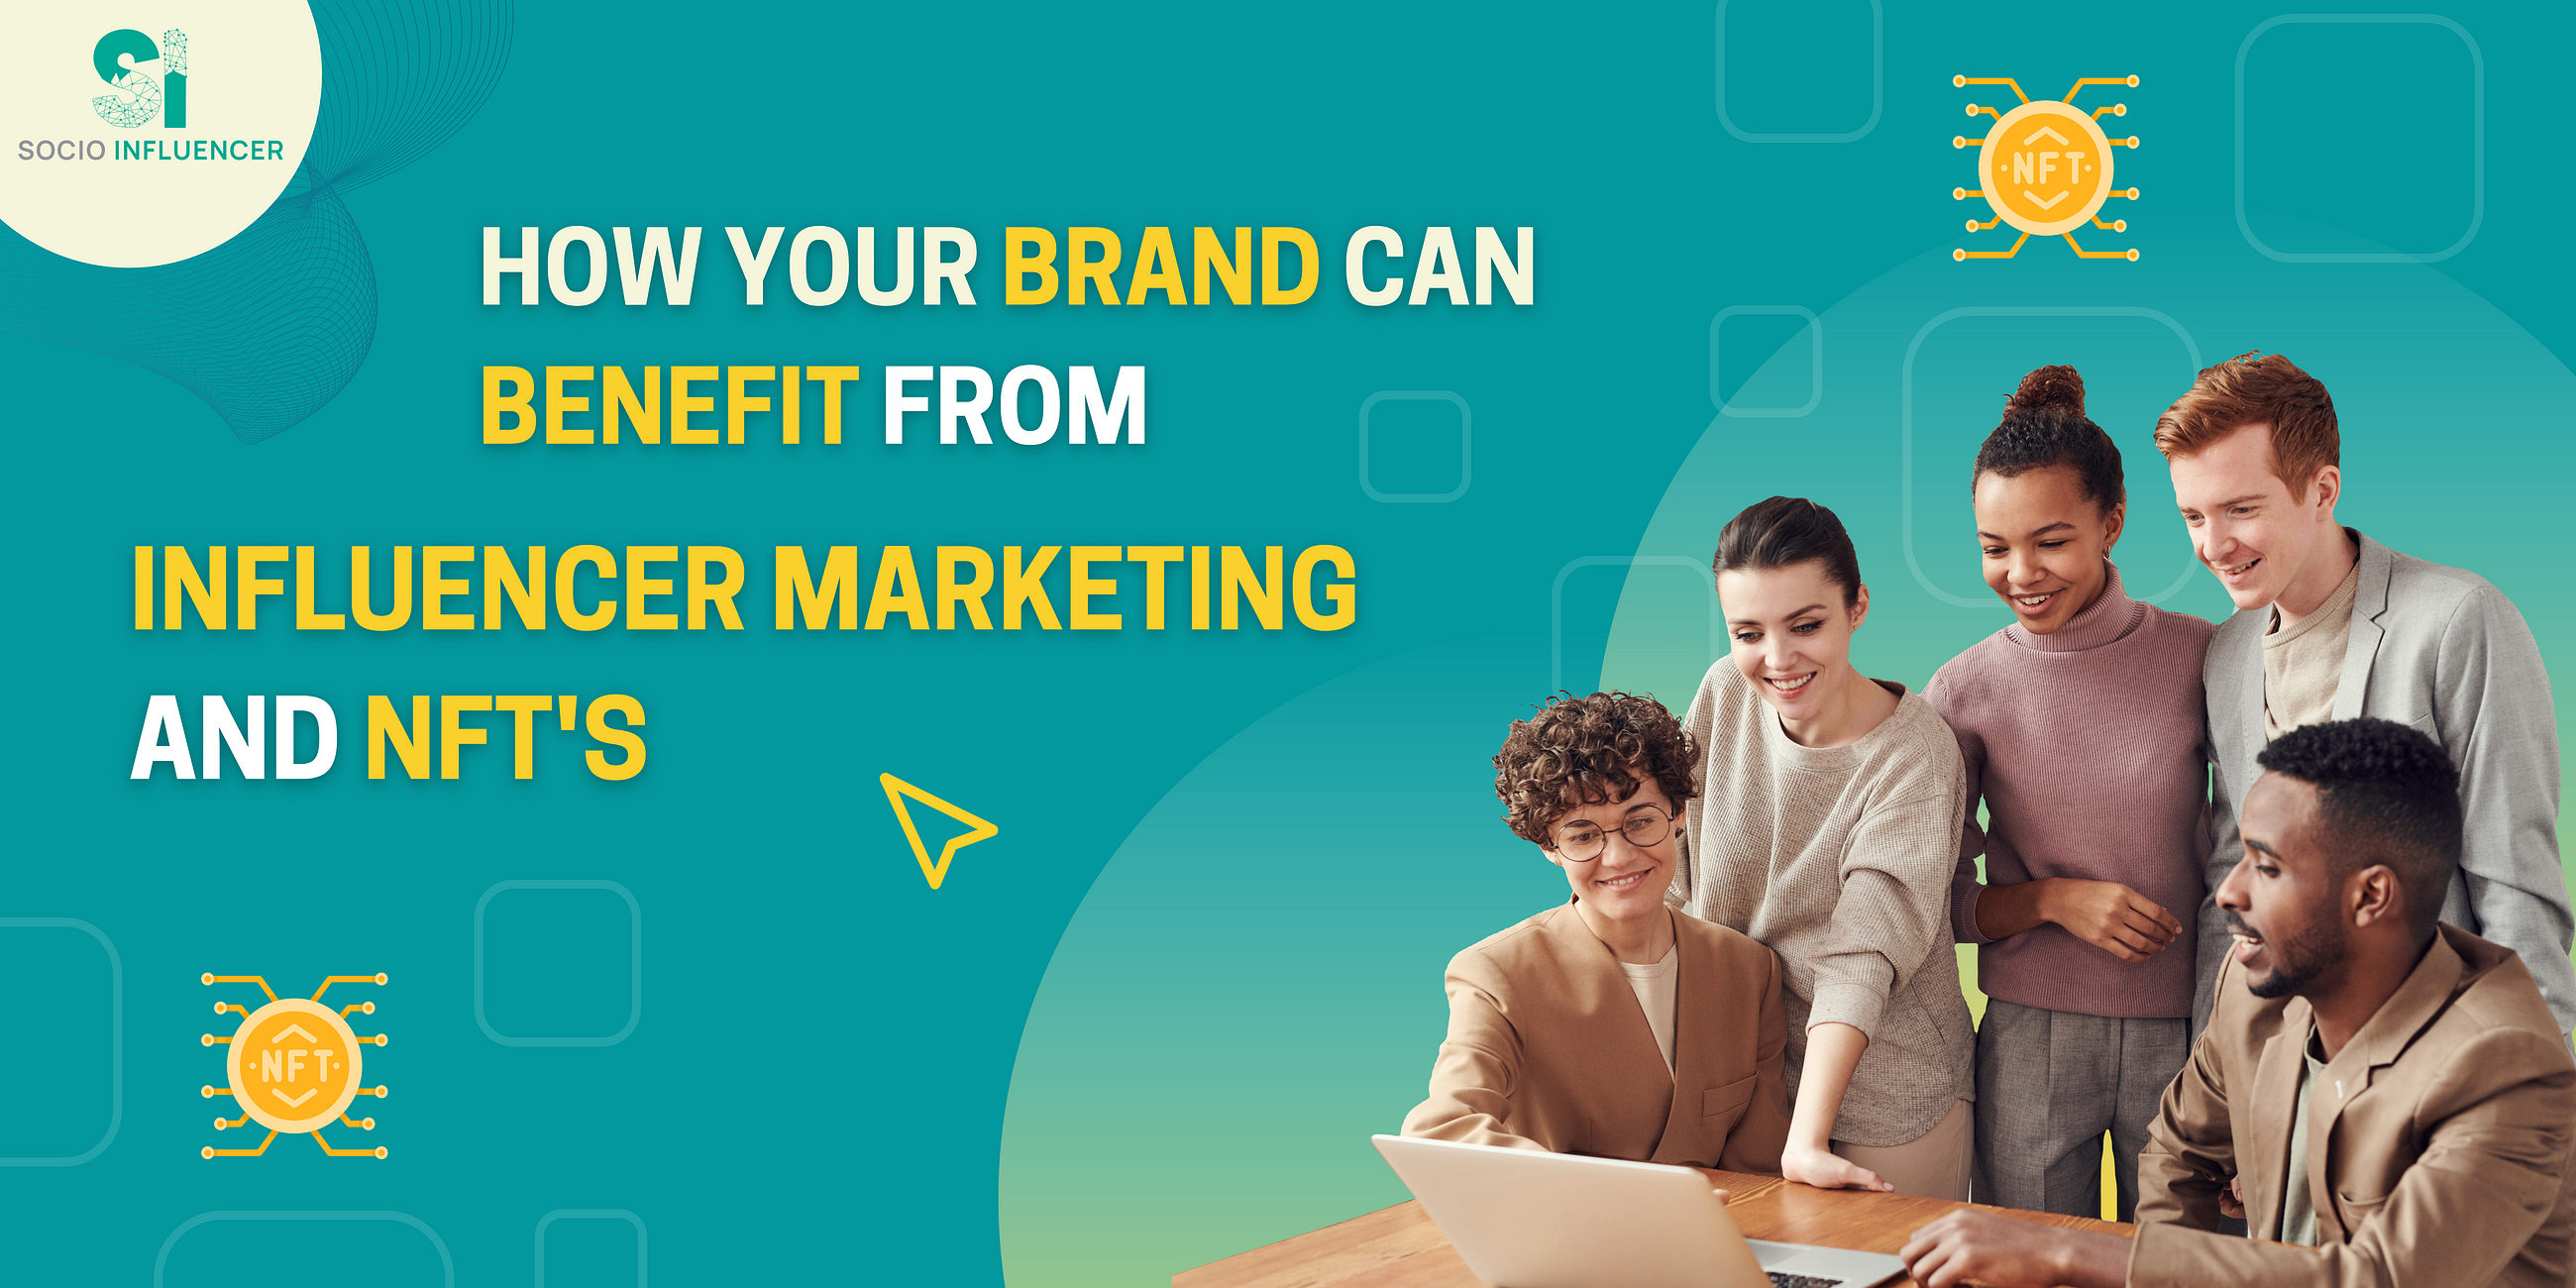 Influencer Marketing and NFTs: How Your Brand Can Benefit